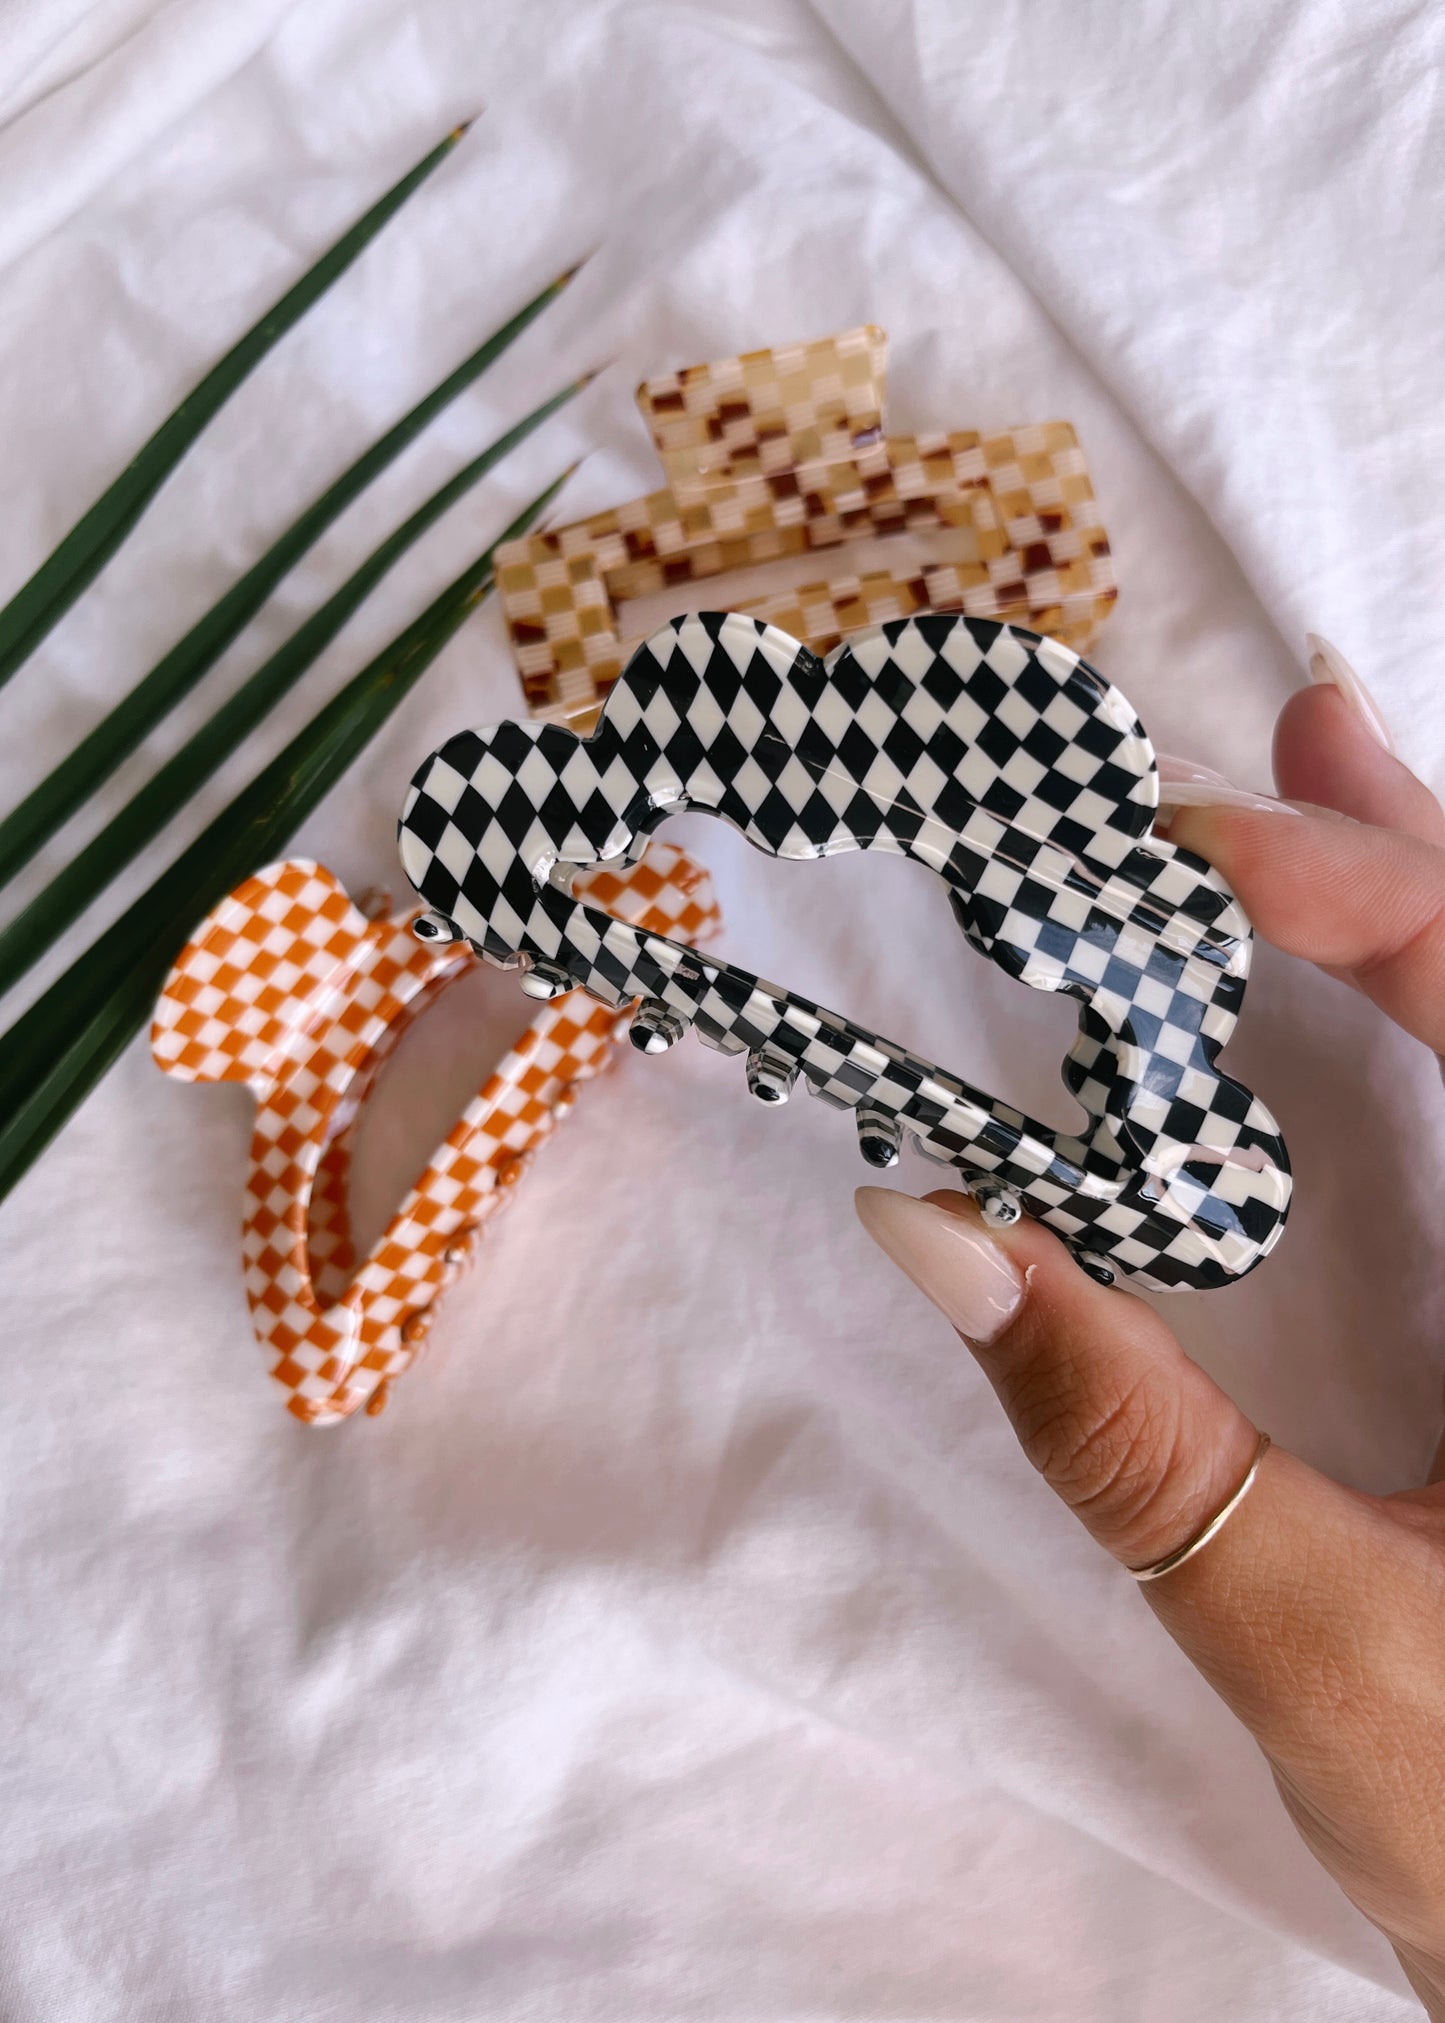 Checkered claw clips